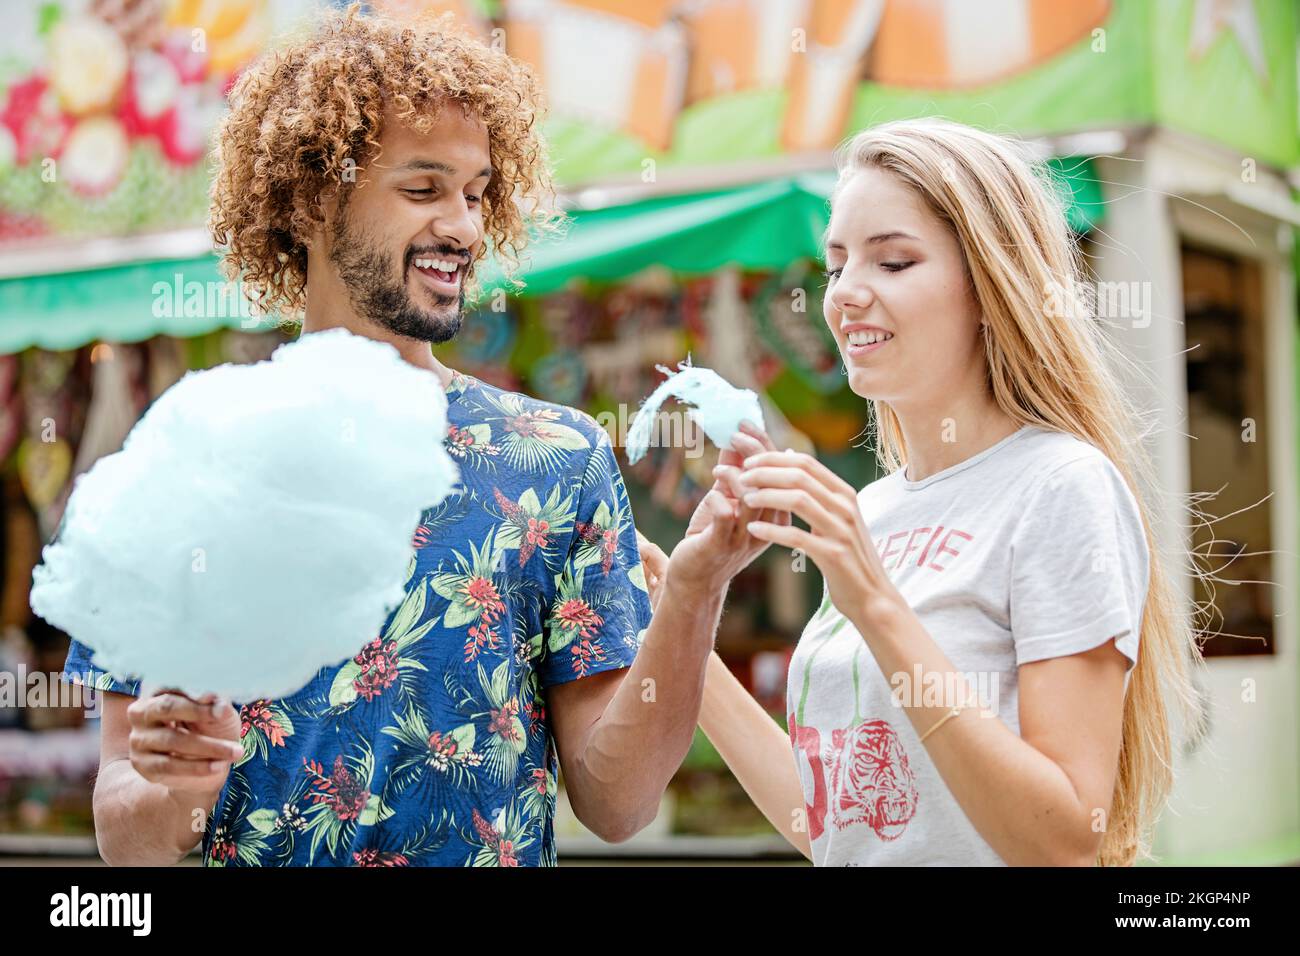 Young couple eating candy floss at a fun fair Stock Photo